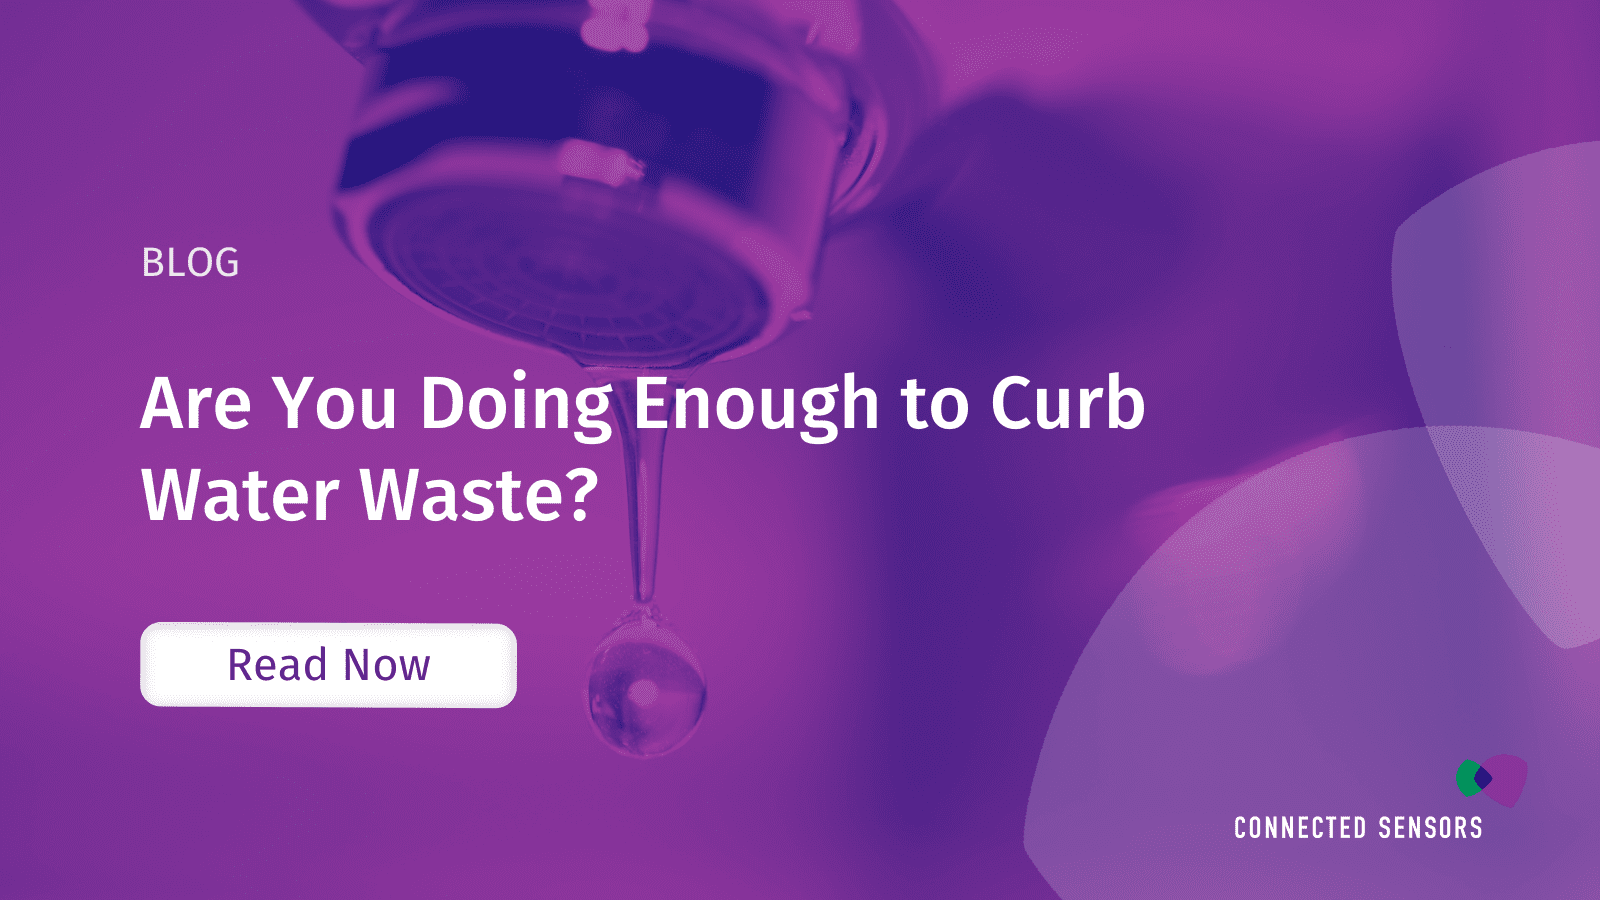 Are You Doing Enough to Curb Water Waste?